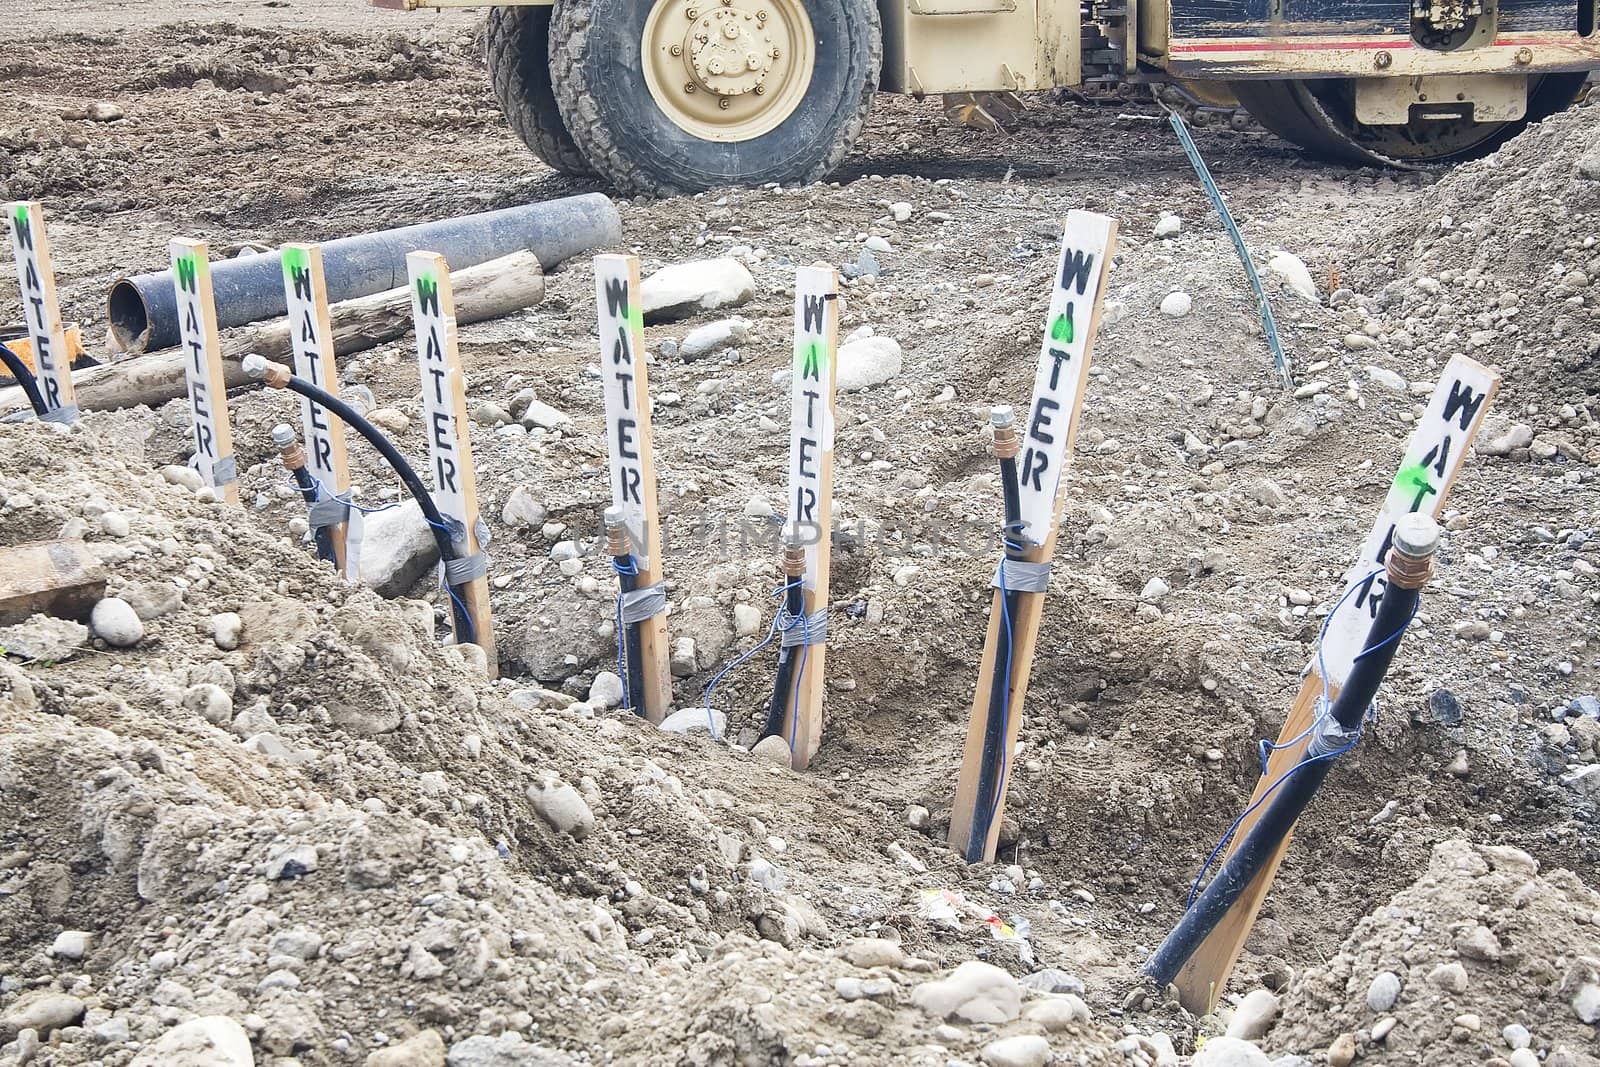 Pipes for water service are ready for hooking up at a construction site.